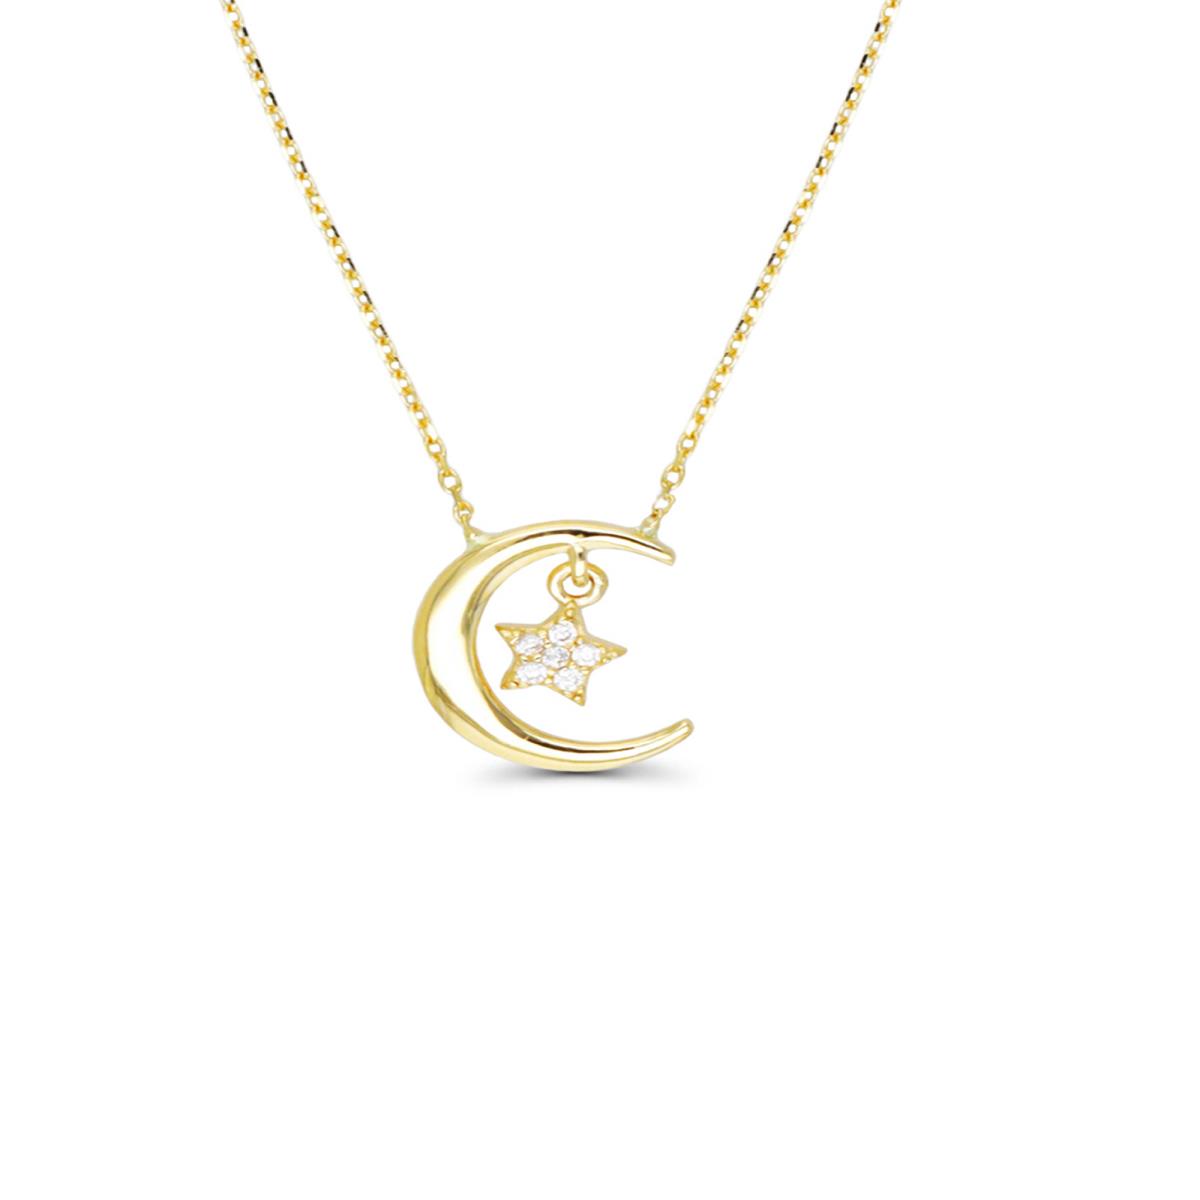 14K Yellow Gold Crescent Moon & Dangling Star 16"+2" Necklace